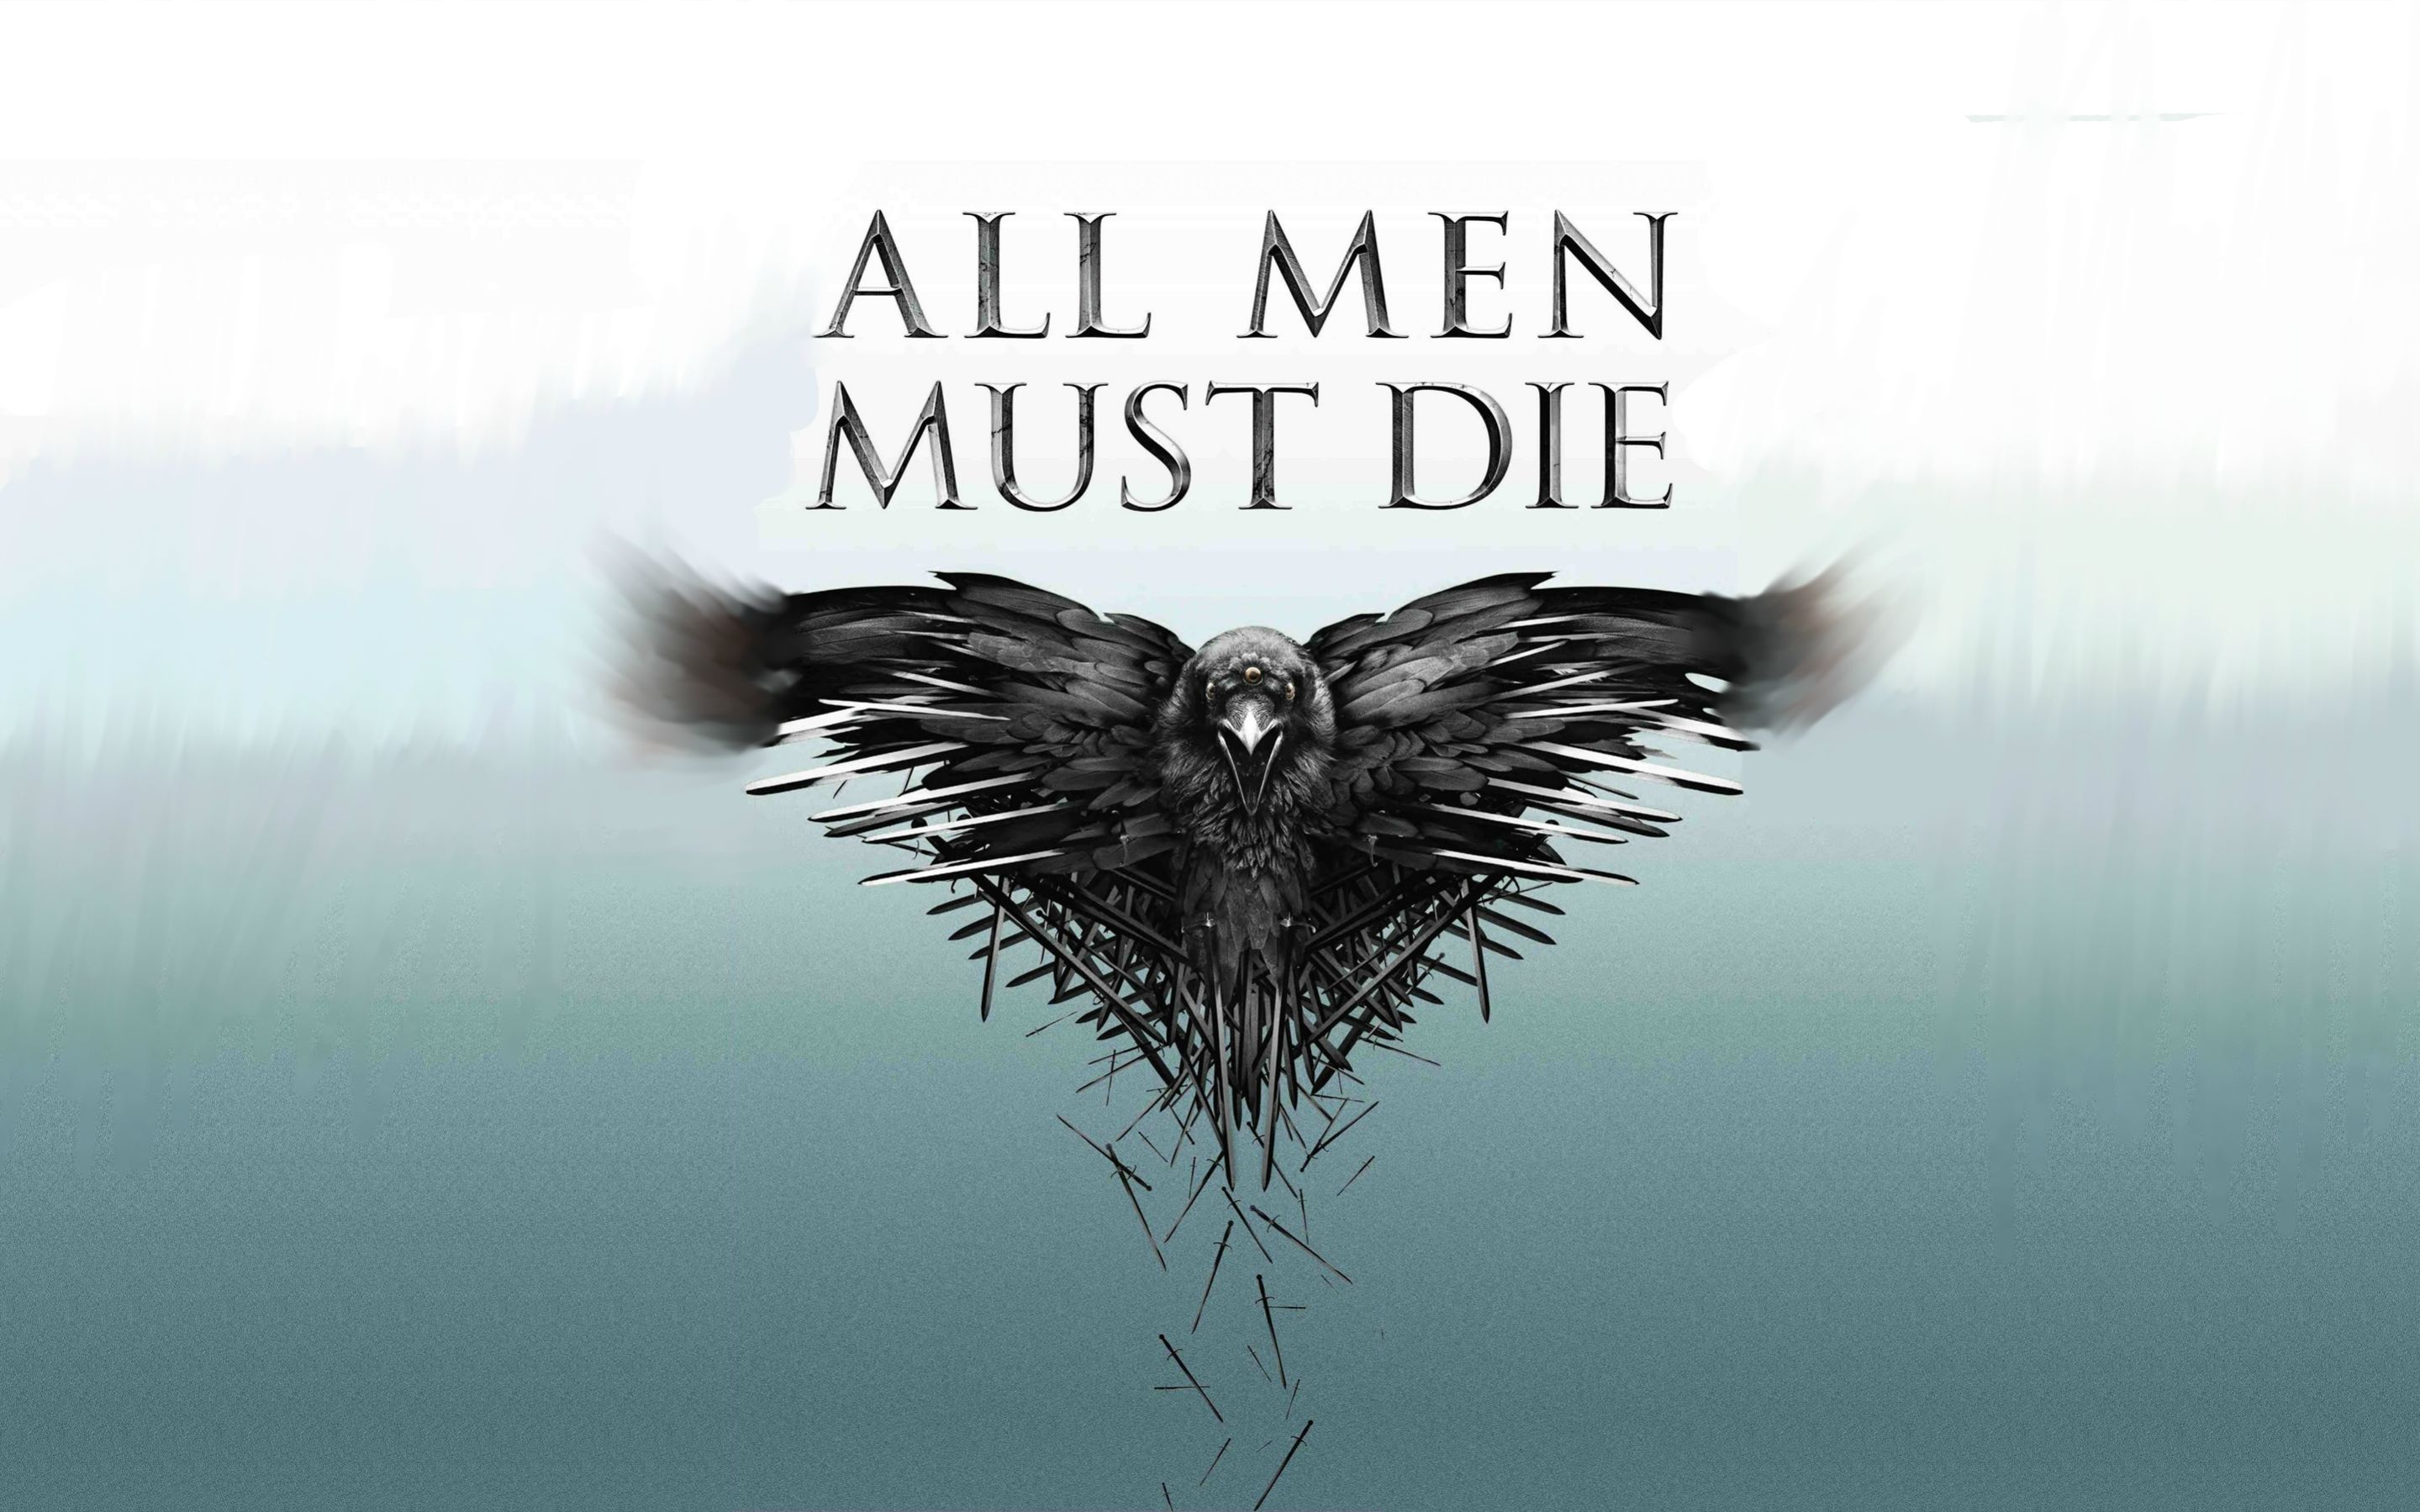 Game of thrones wallpapers